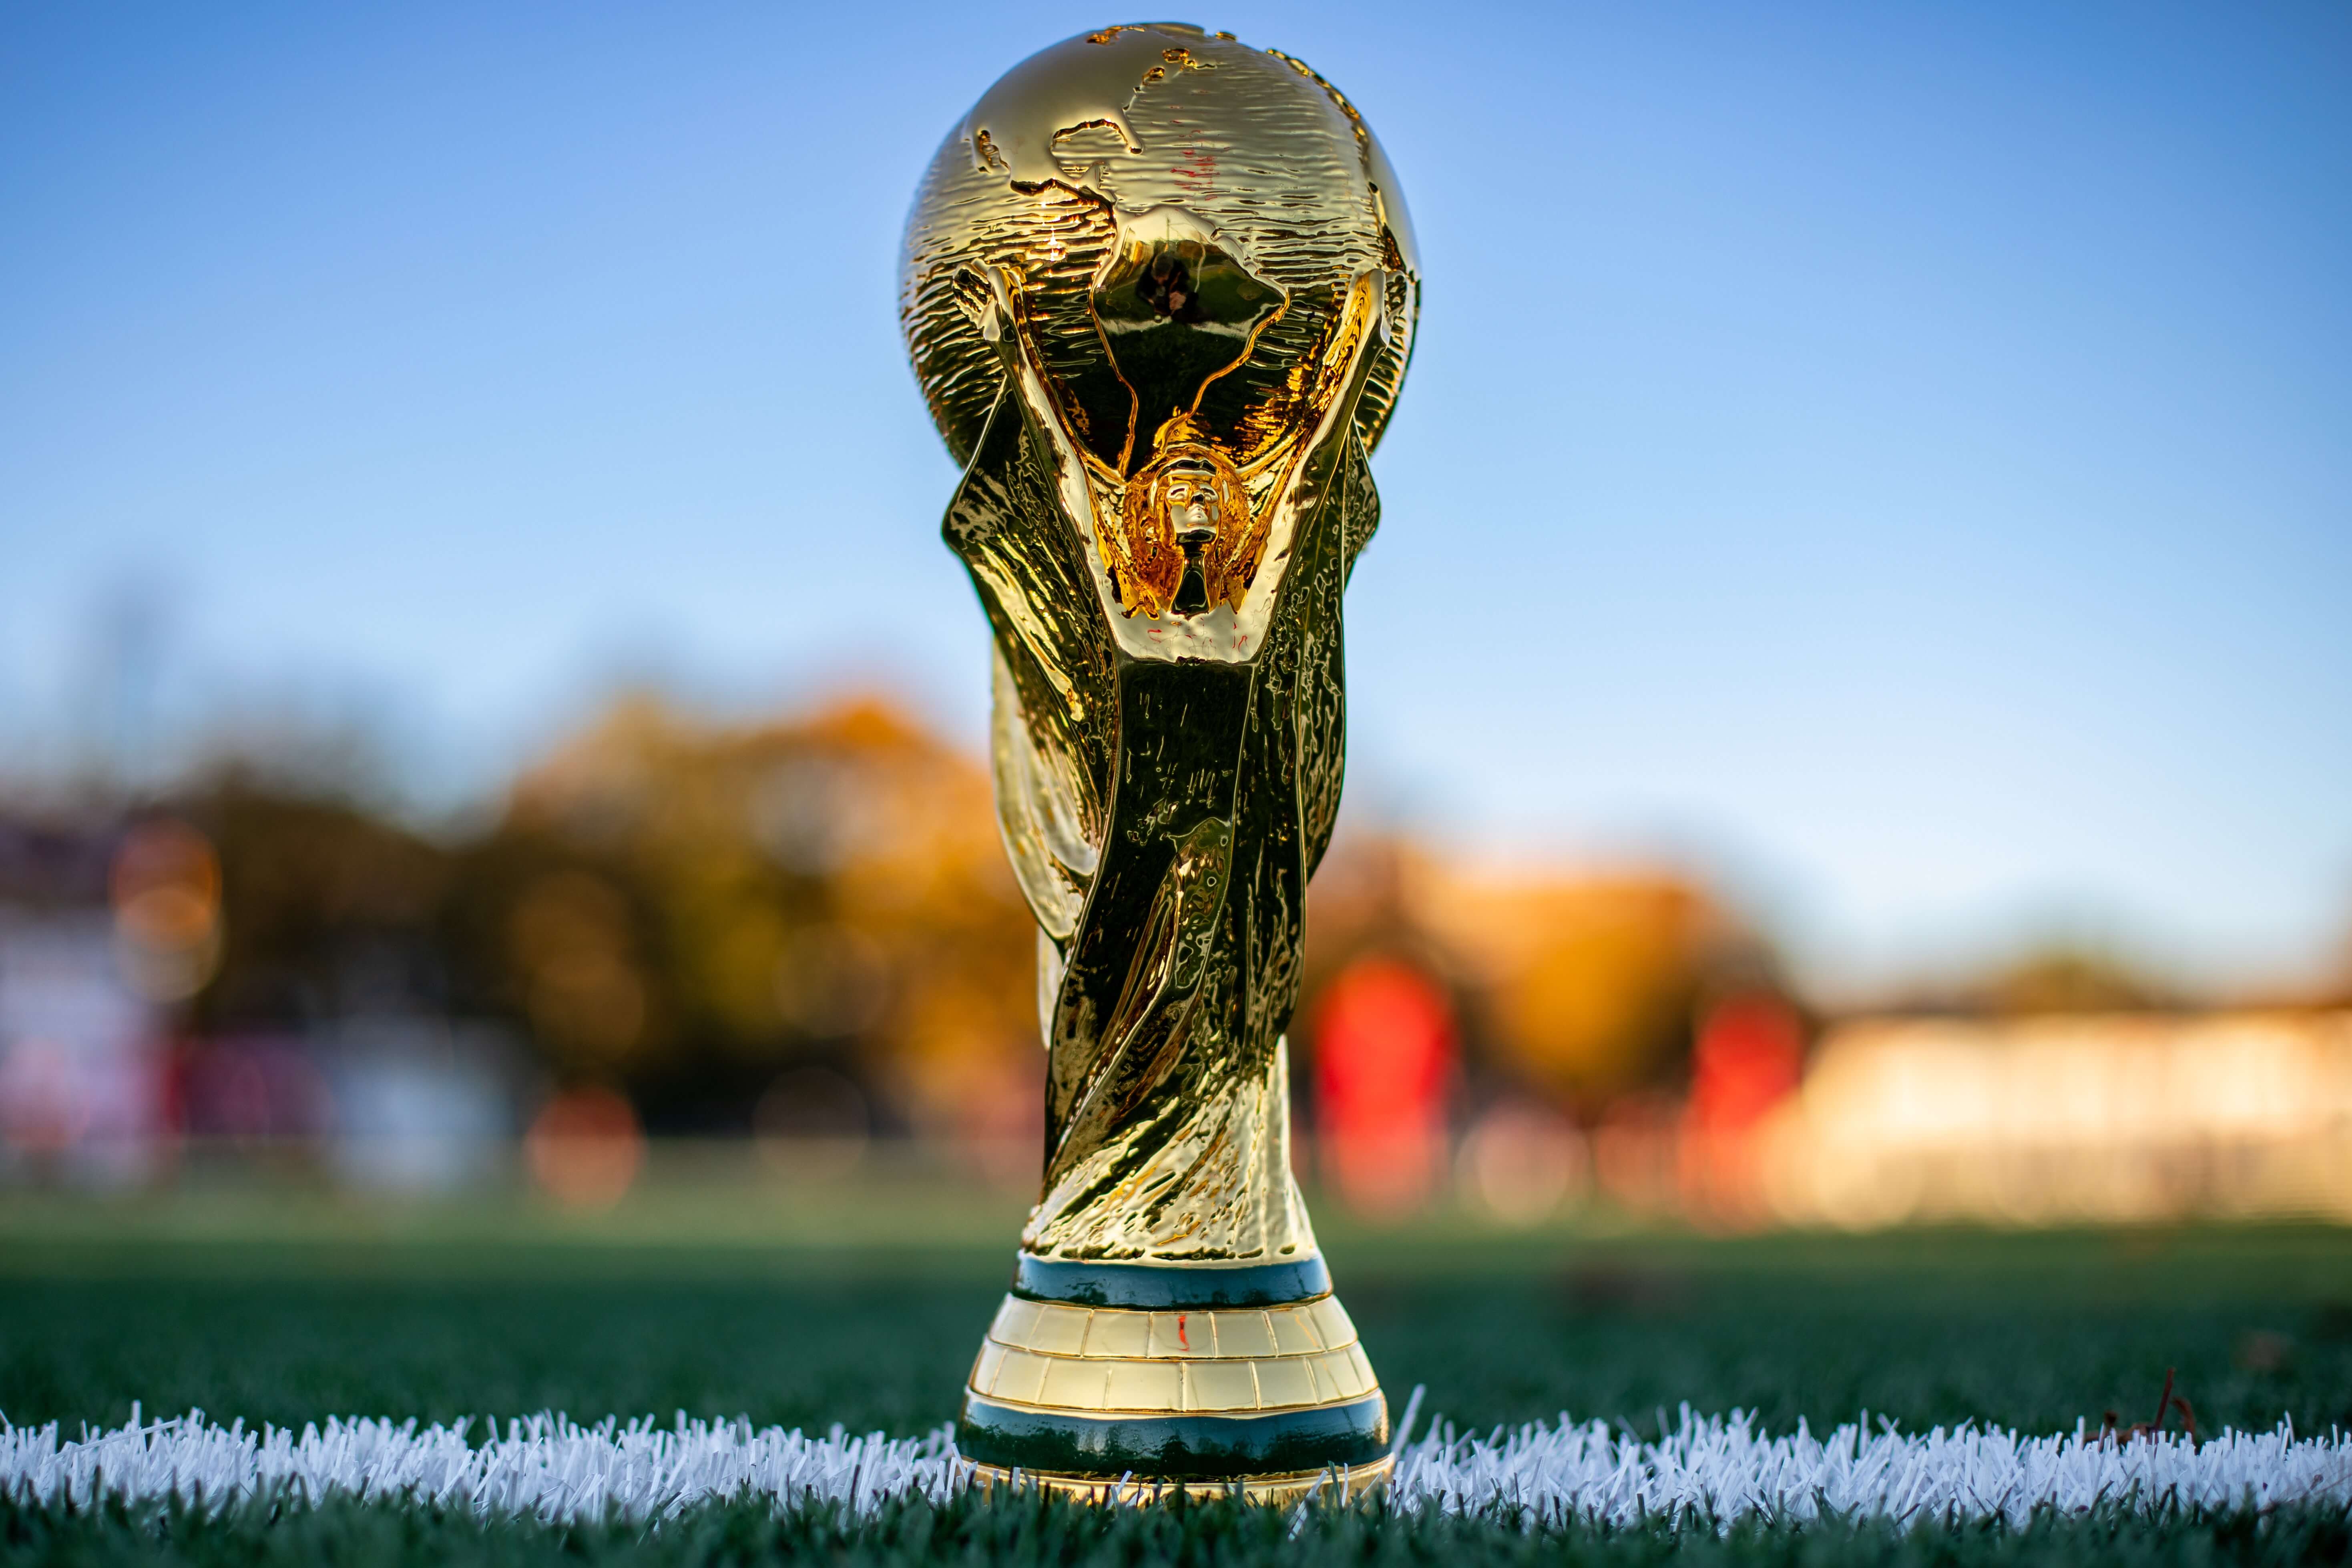 An image of the world cup trophy to represent the Qatari Cuisine Herbs And Spices.